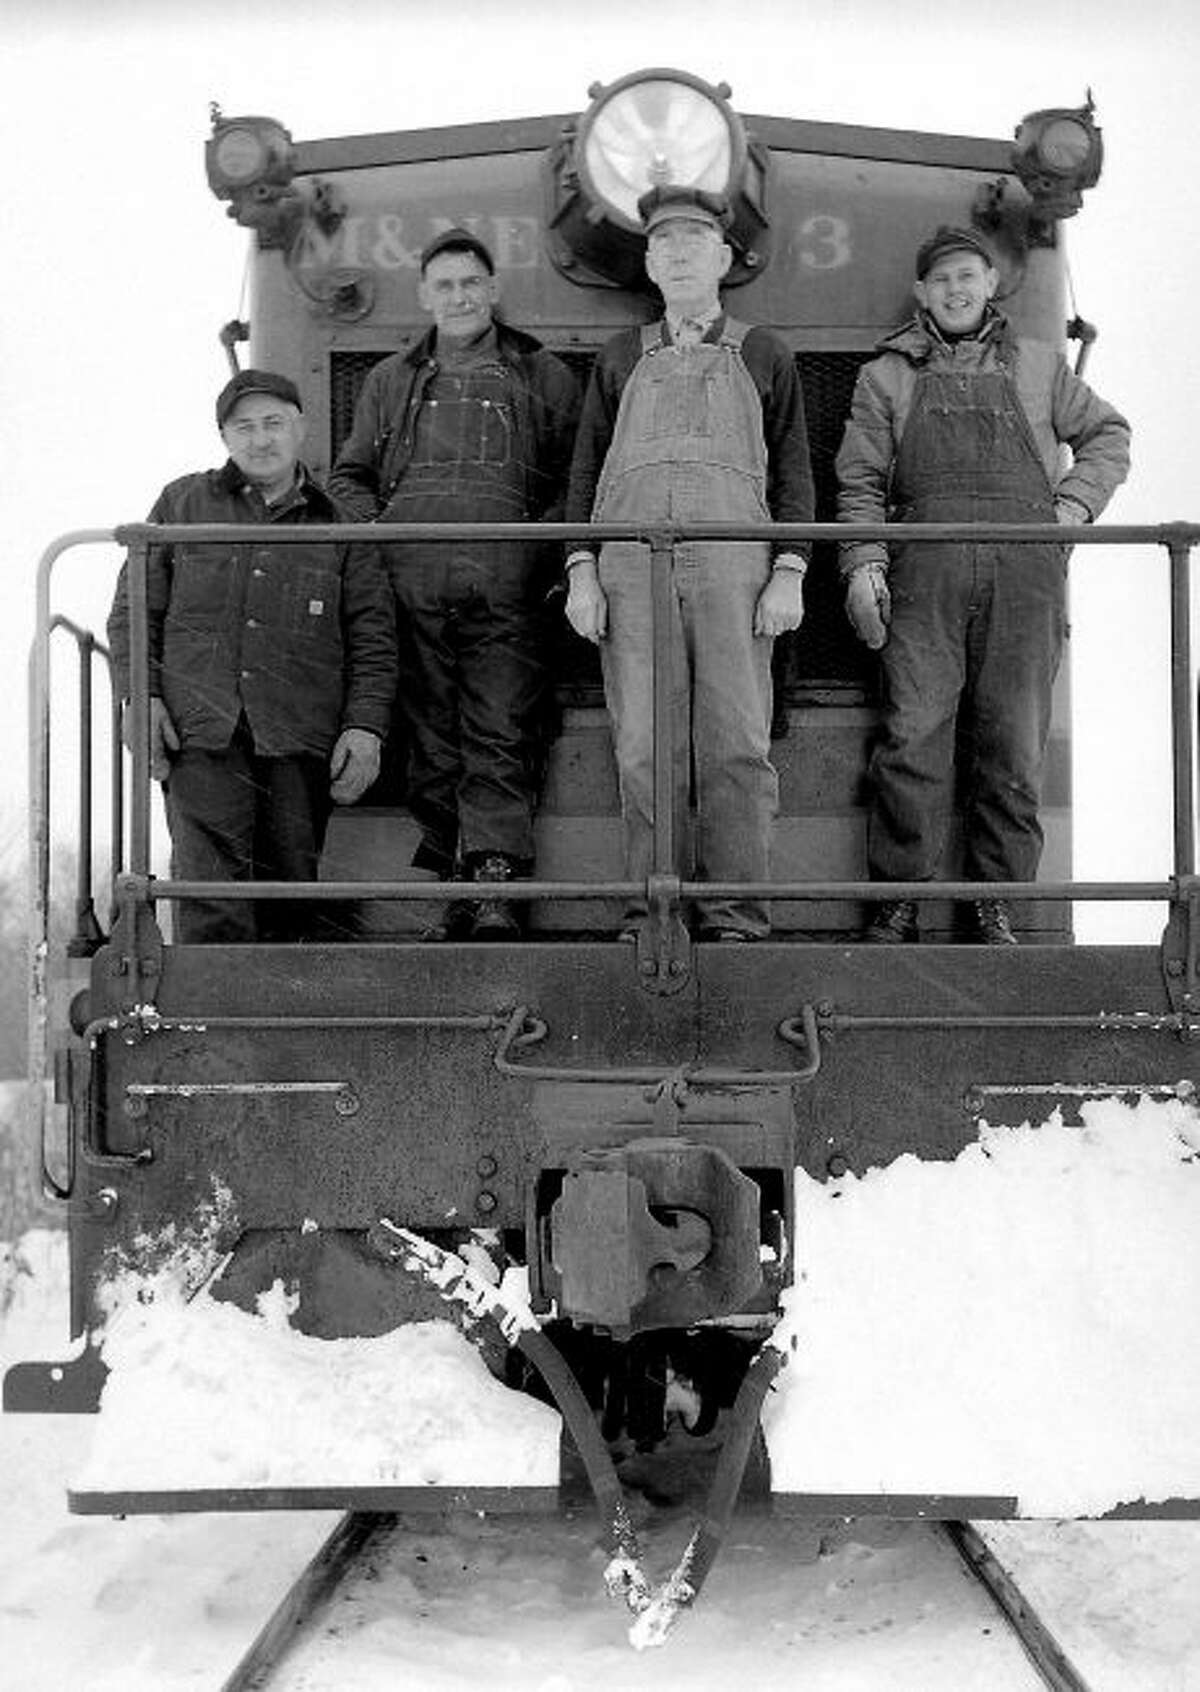 Workers from the M&N.E. railroad stand on the front of their engine in this 1950s photograph.